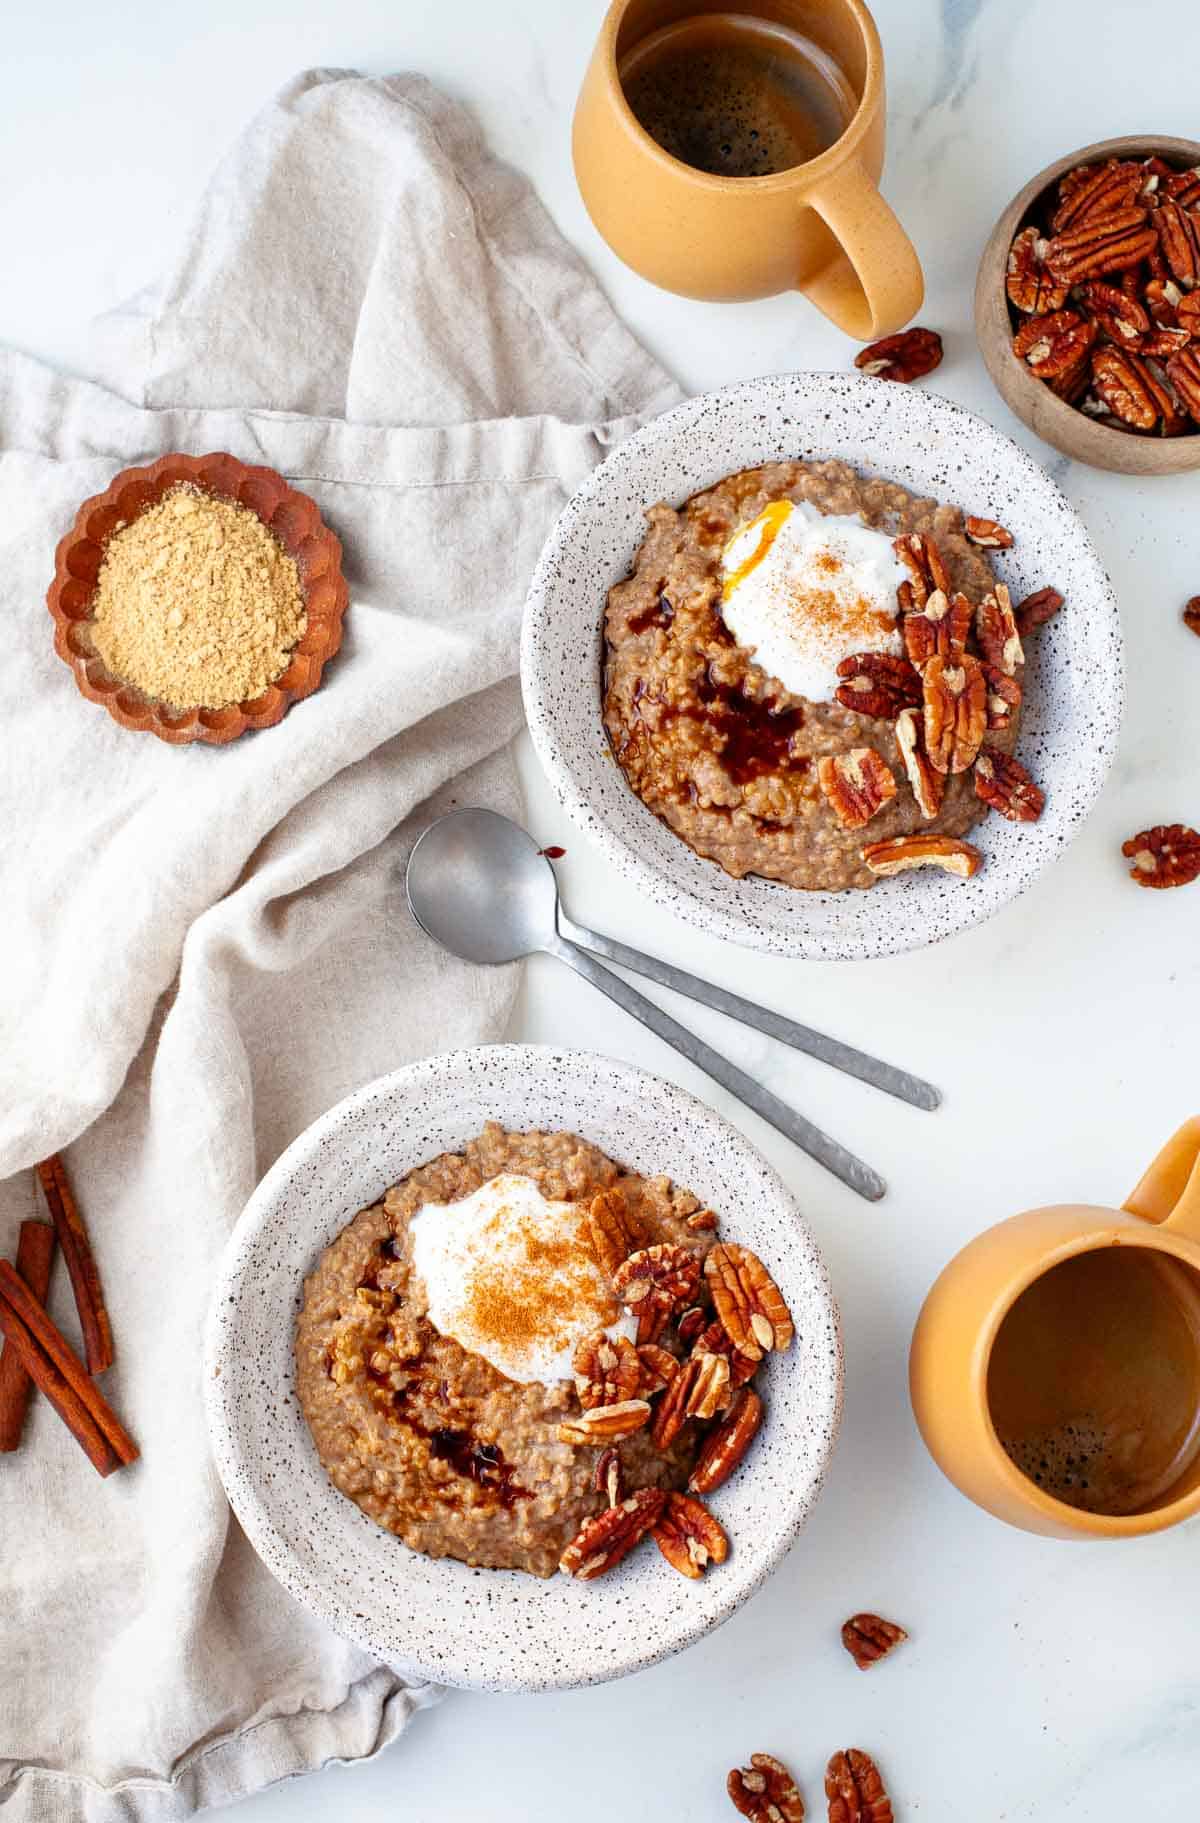 Two white speckled bowls filled with Gingerbread Oatmeal topped with yogurt, pecans and cinnamon, beside two orange coffee mugs, a small bowl of pecans, and a kitchen dish towel